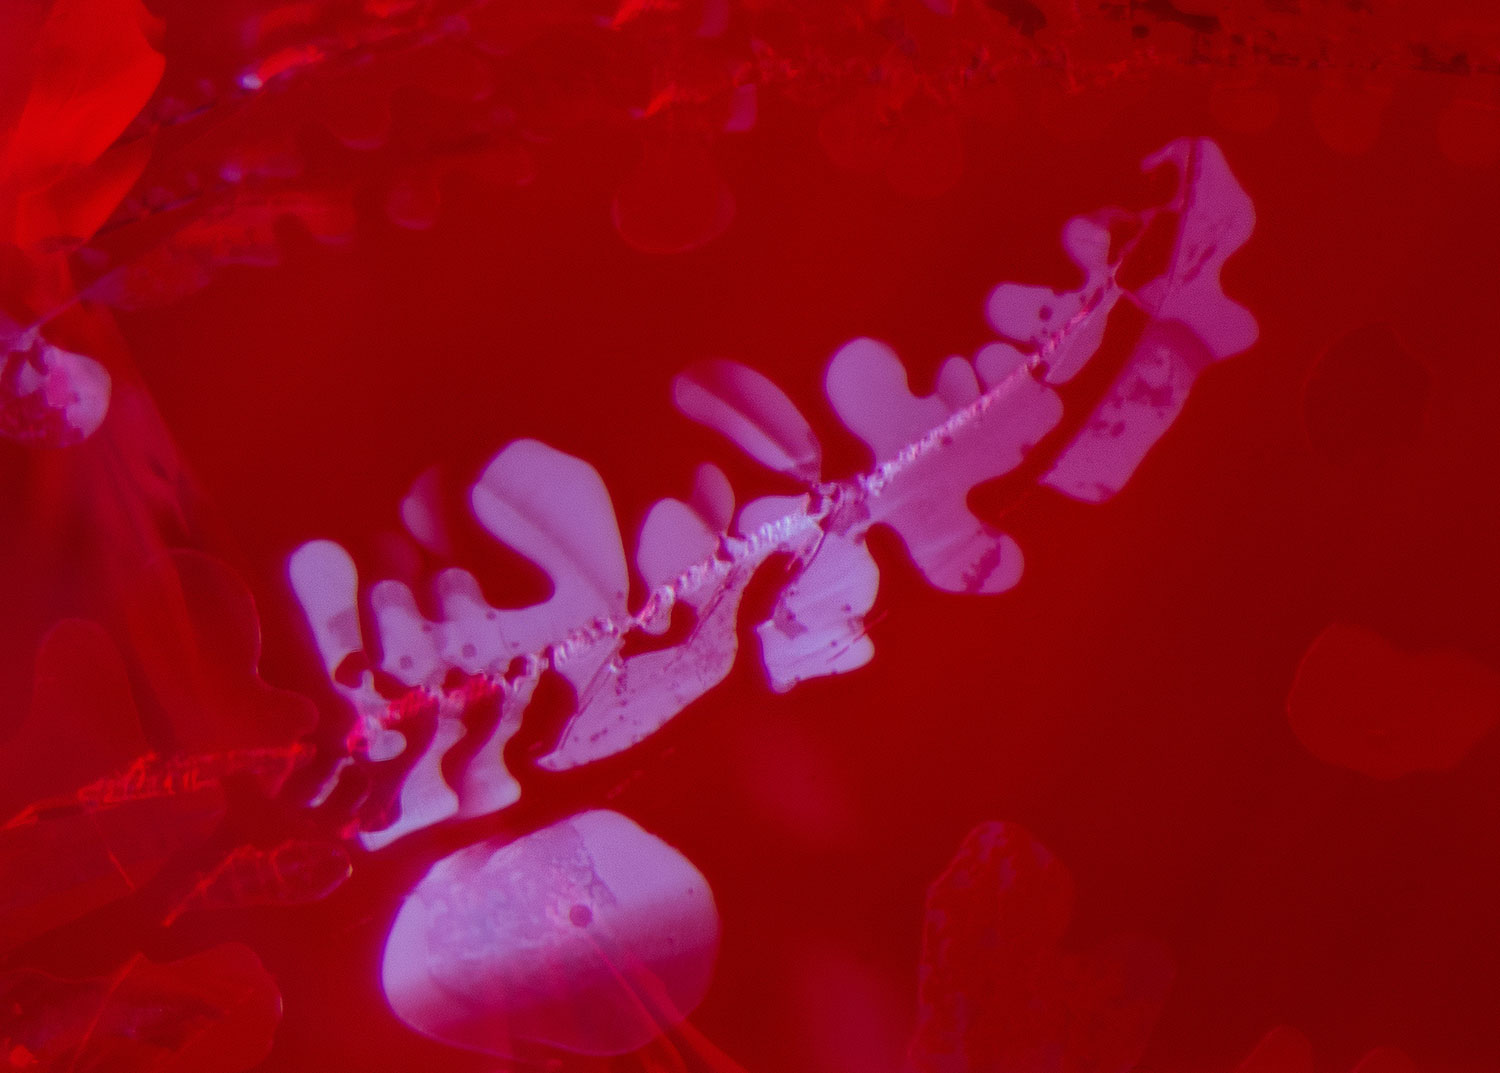  The use of the long-wave UV torch illuminates the glass filling in the fissure, so the dendritic pattern is much more visible. The chalky appearance of the filler stands out against the red fluorescence of the ruby.